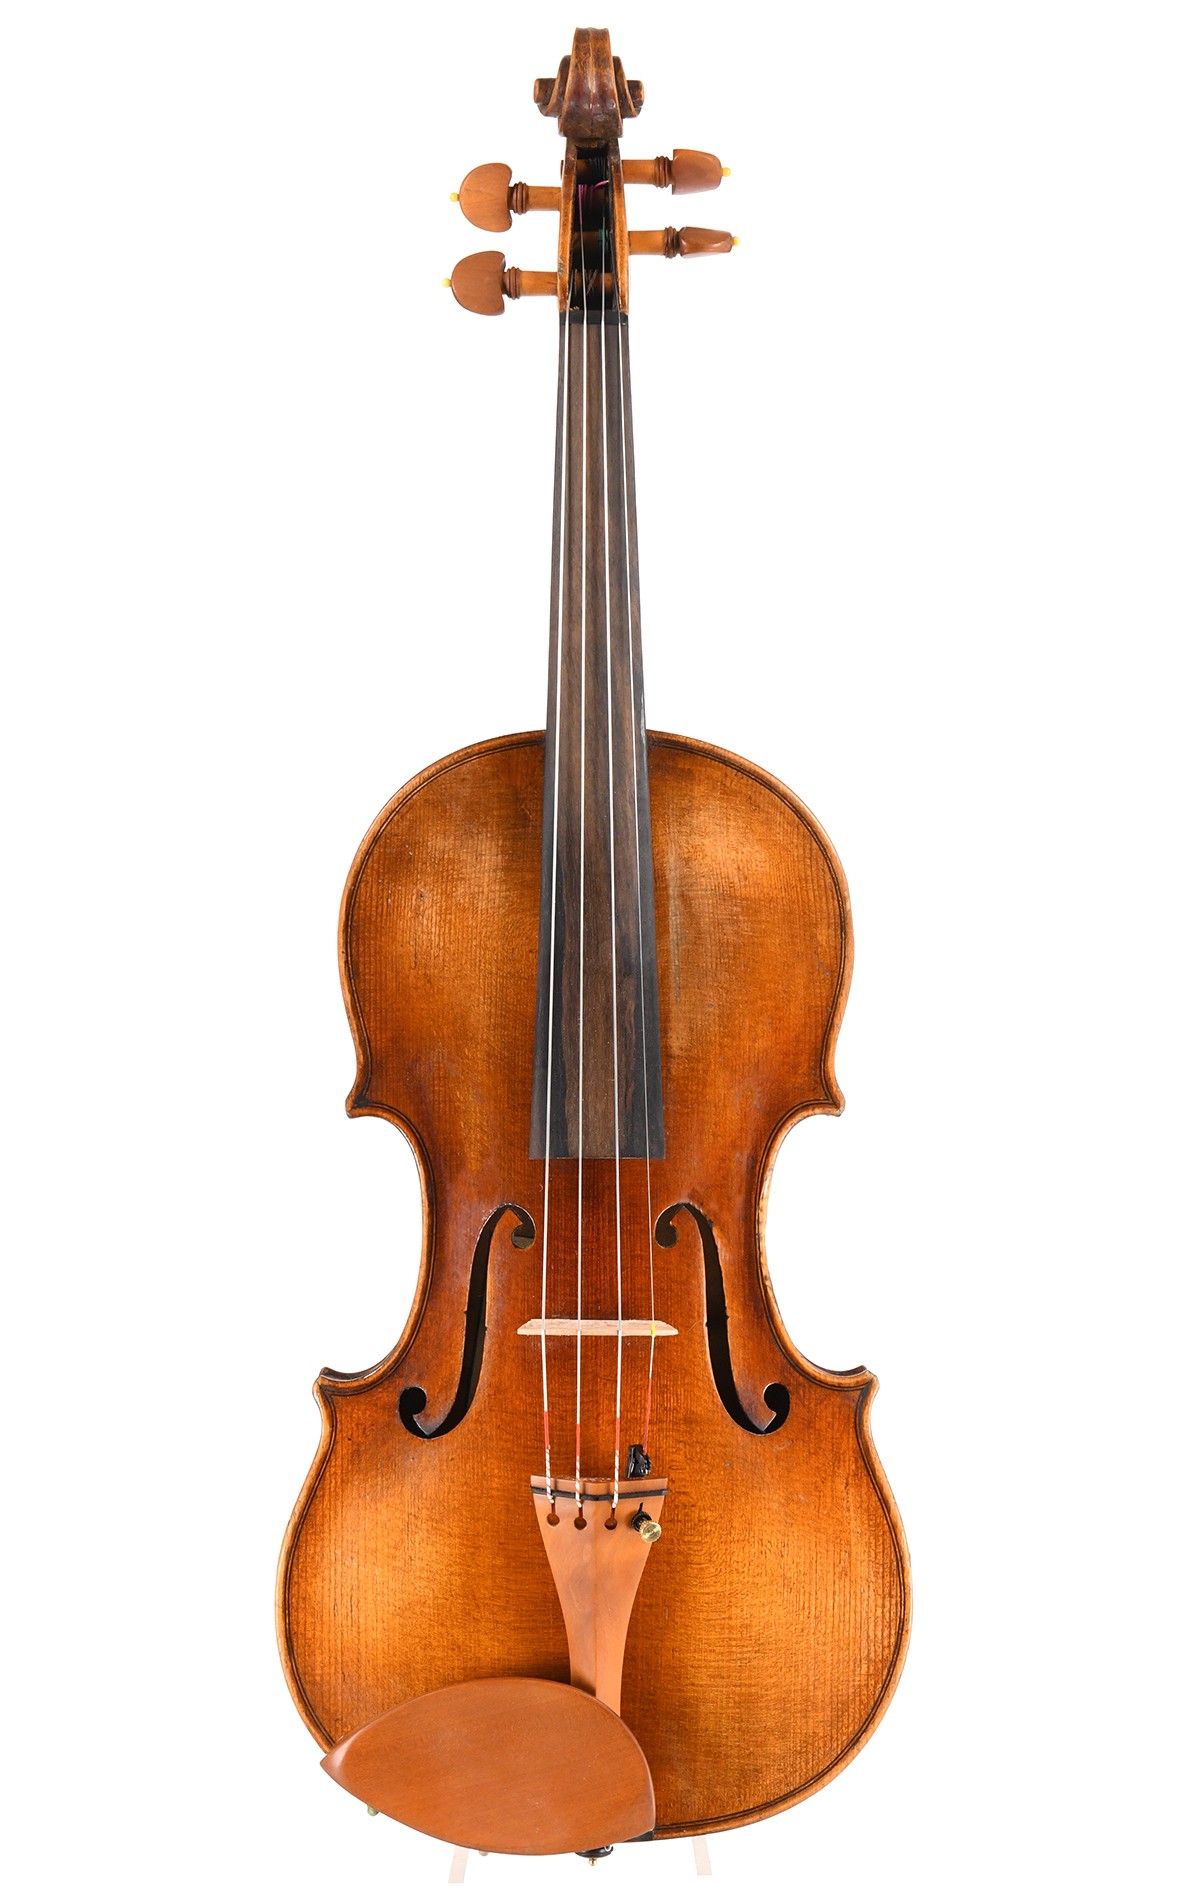 Attractive and outstanding old Czech violin, 1930's - Guarnerius